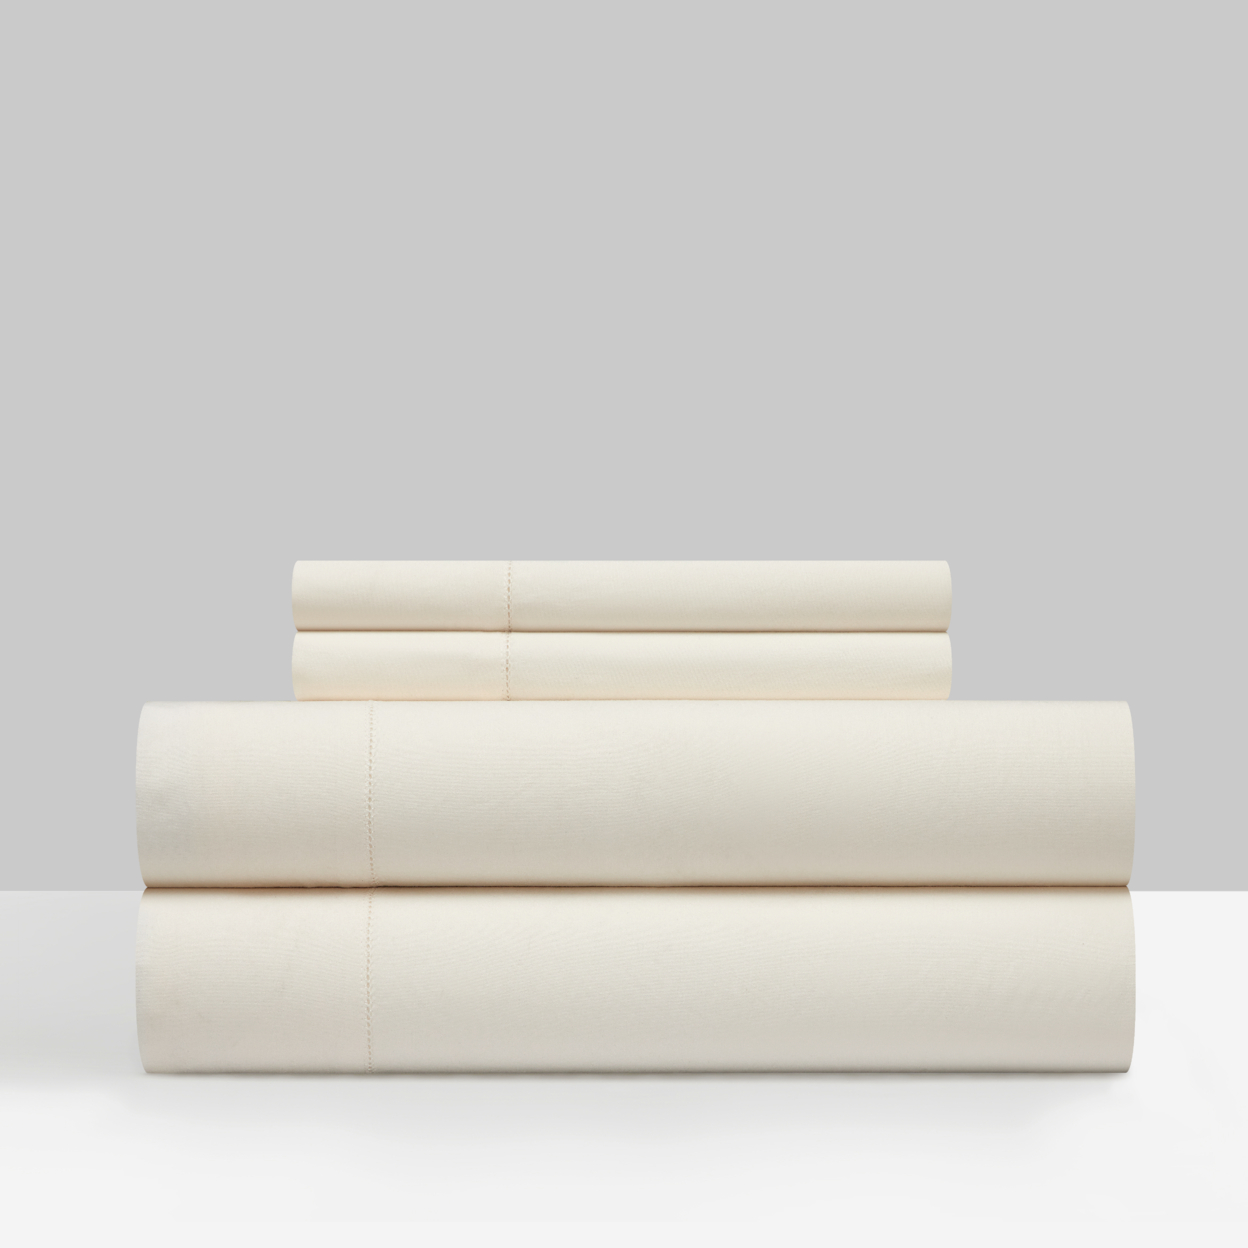 Daisy 3 Or 4 Piece Sheet Set Solid Color Washed Garment Technique - Beige, King